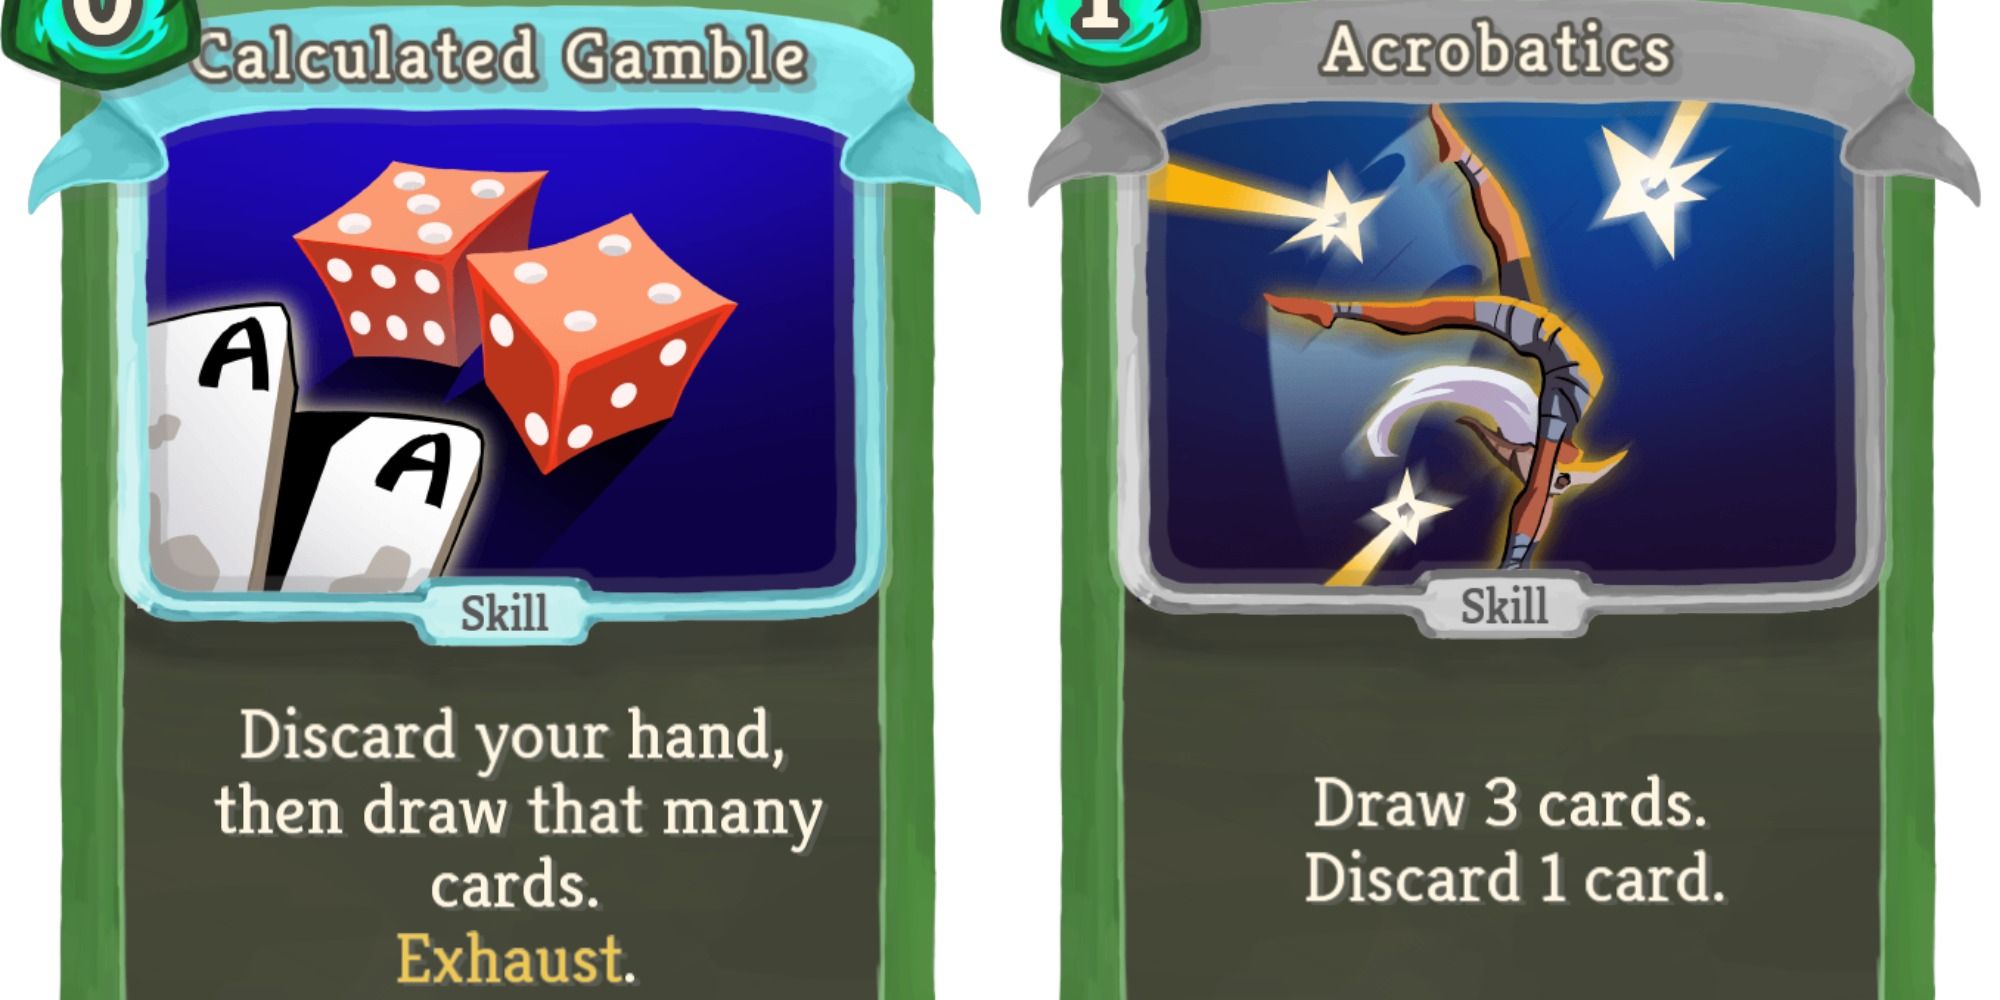 Split image showing the Calculated Gamble and Acrobatics cards in Slay the Spire